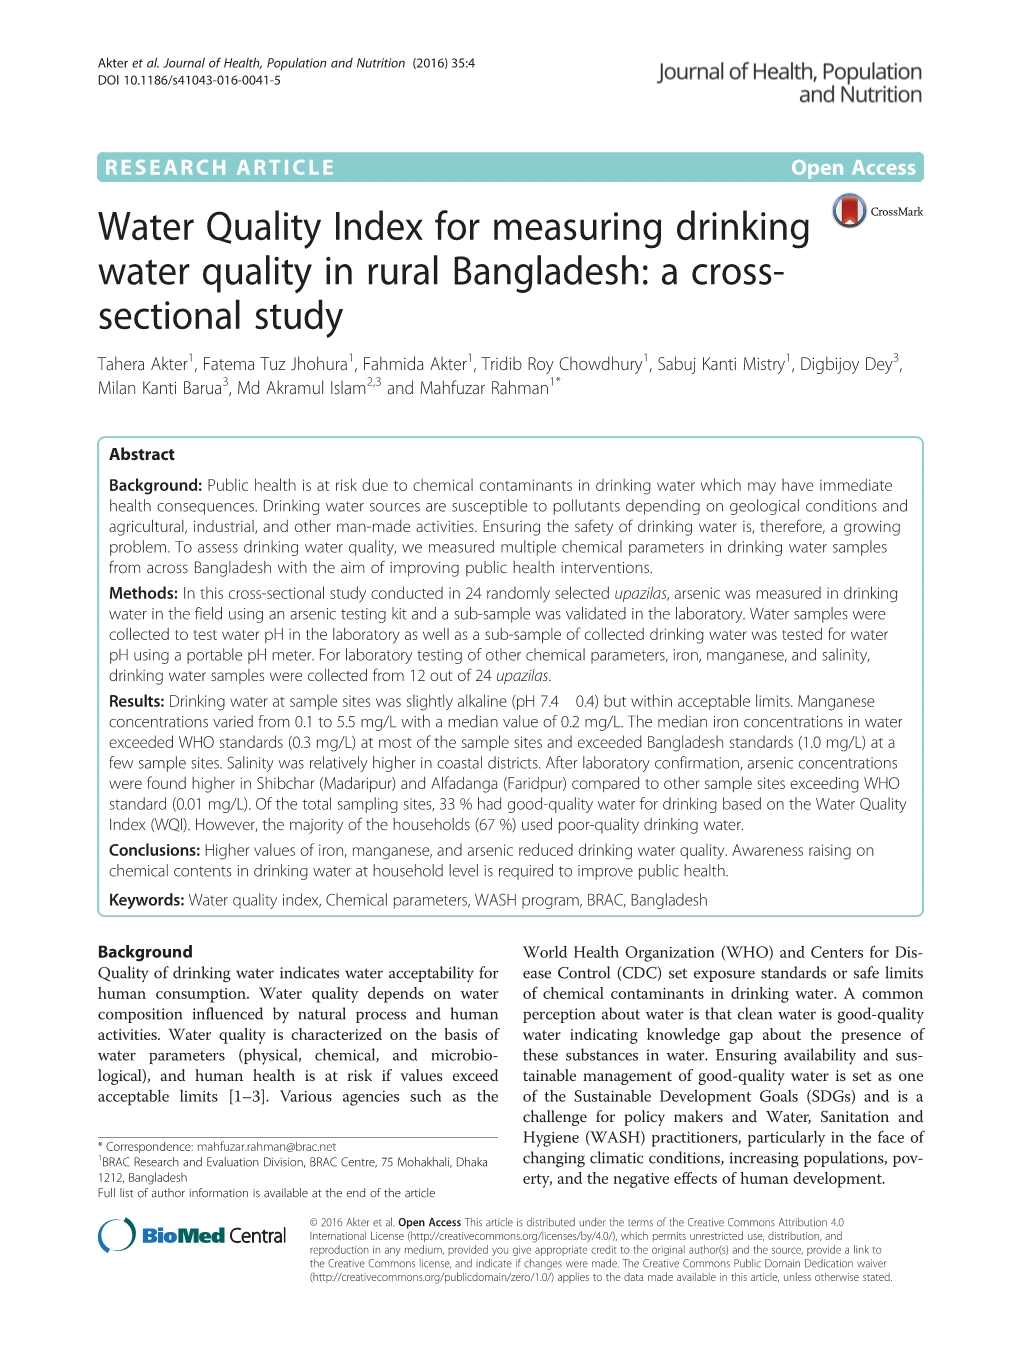 Water Quality Index for Measuring Drinking